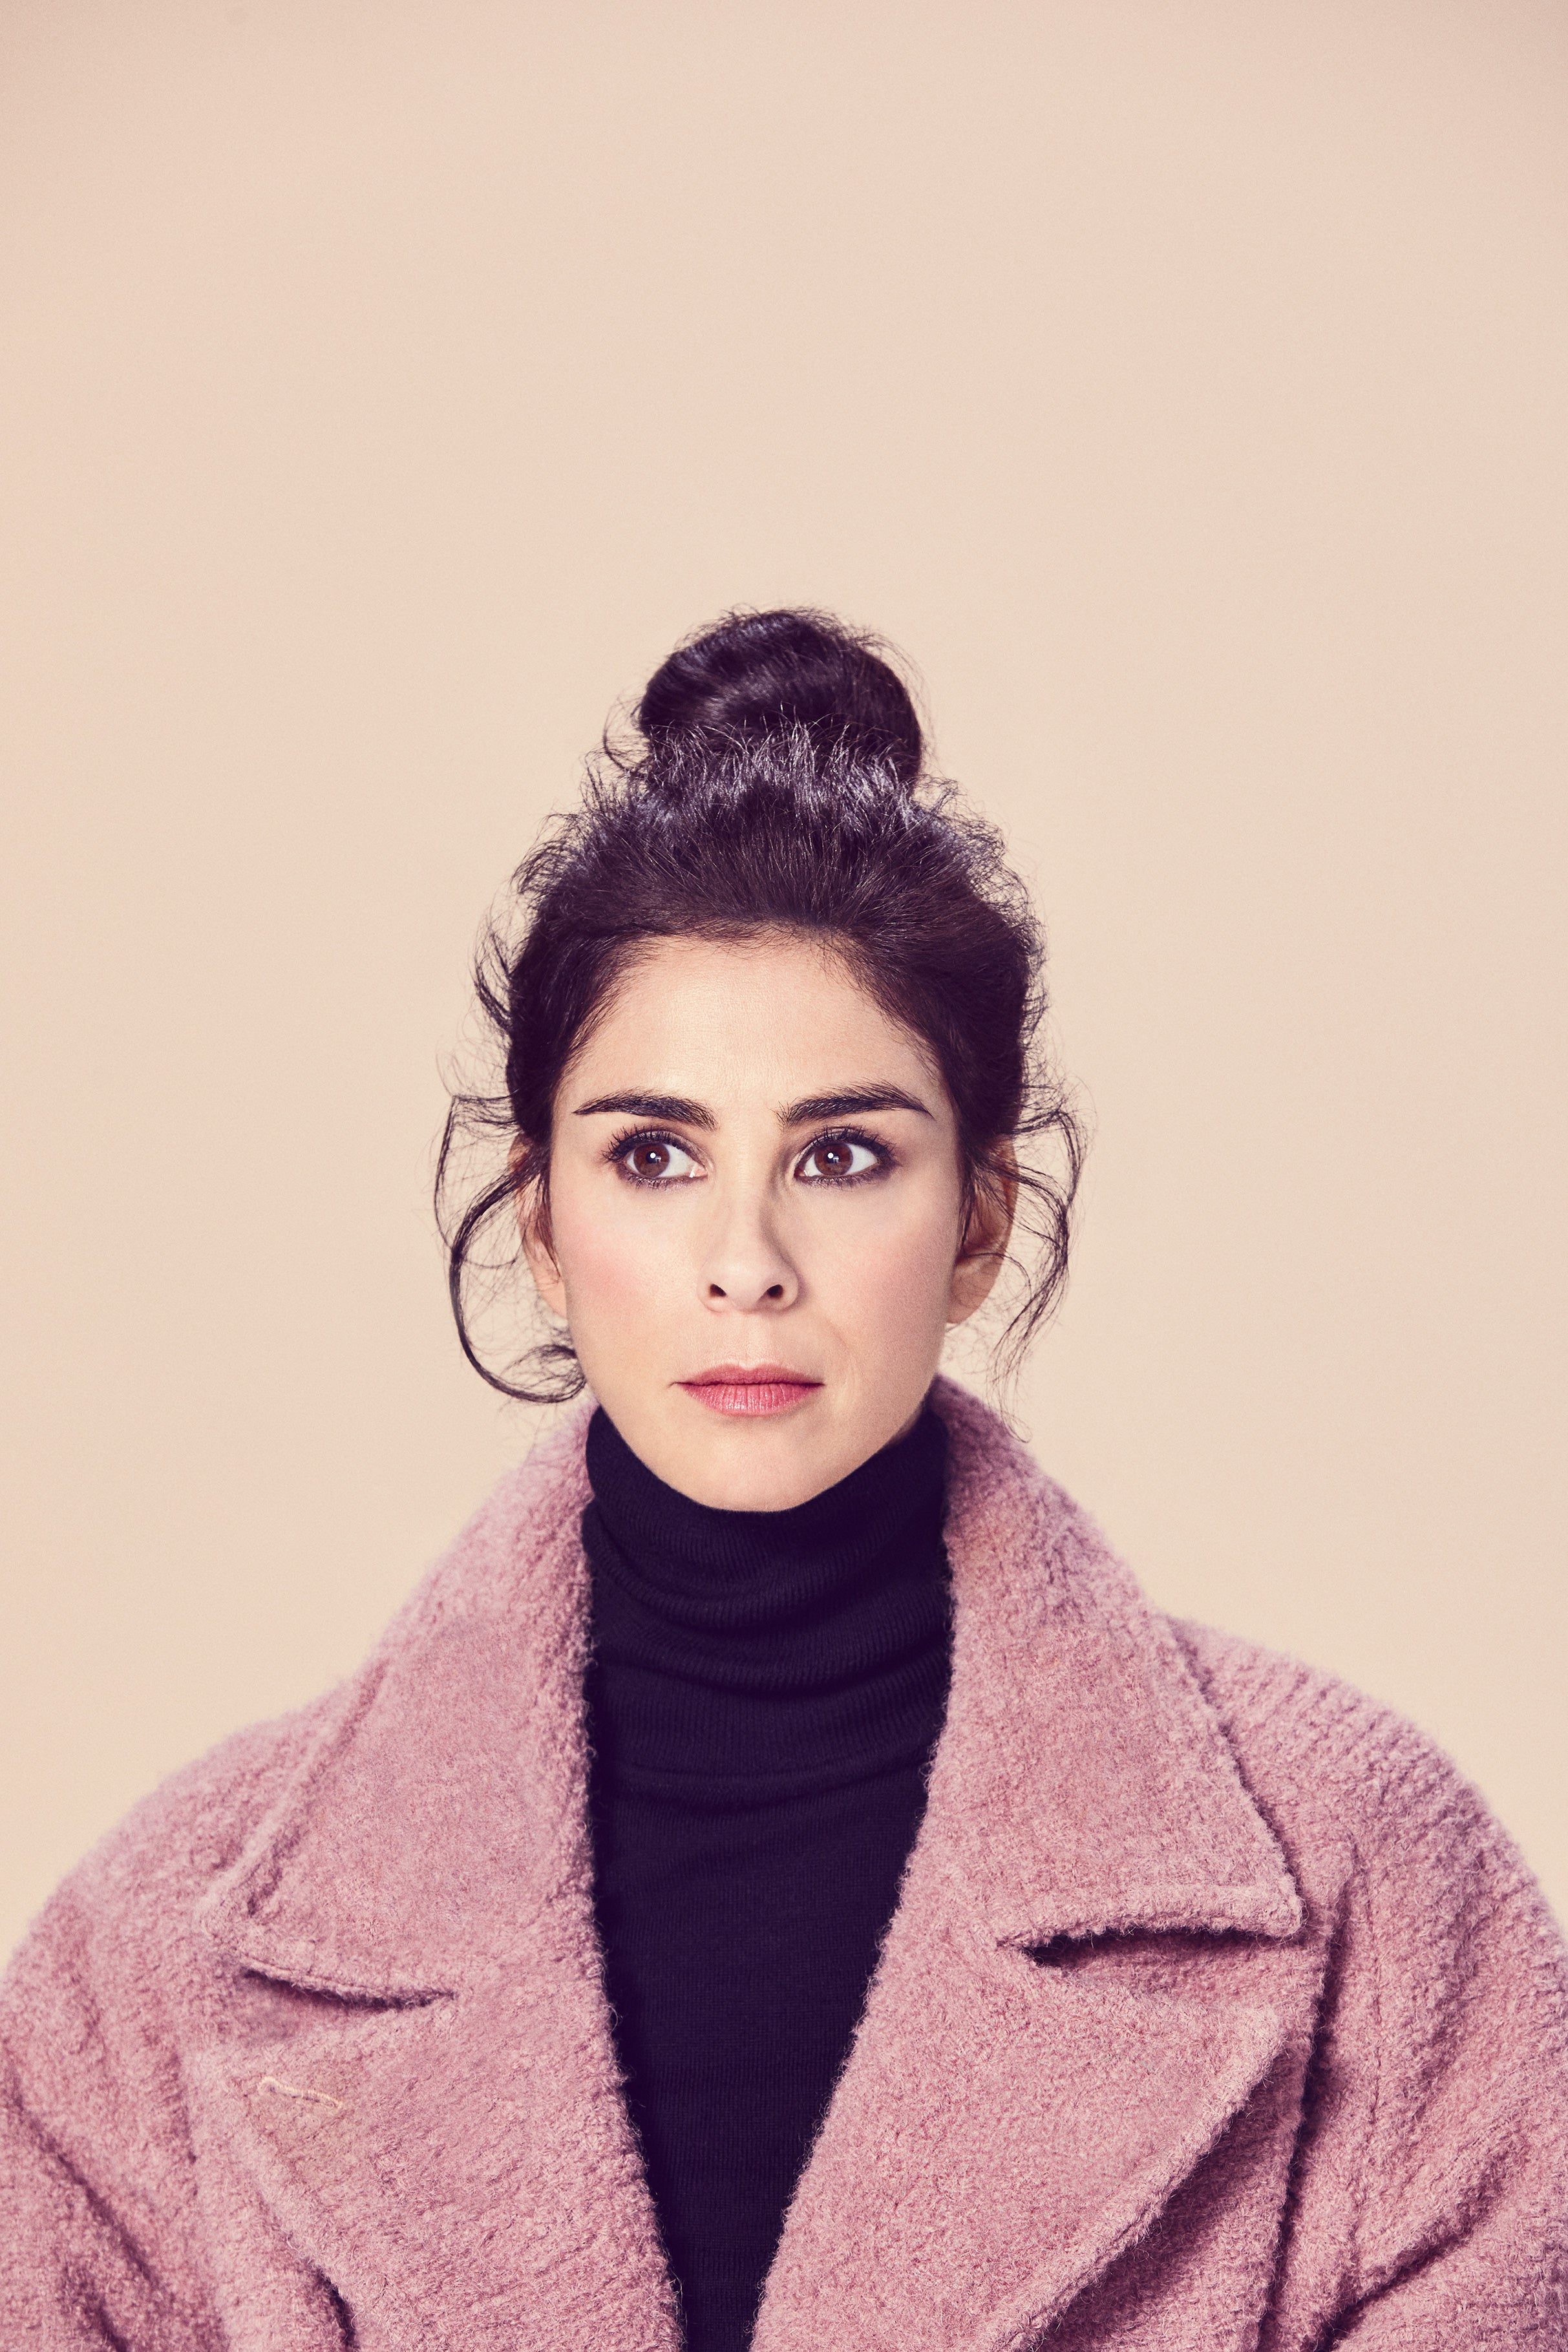 Sarah Silverman: Grow Some Lips presale password for early tickets in Madison